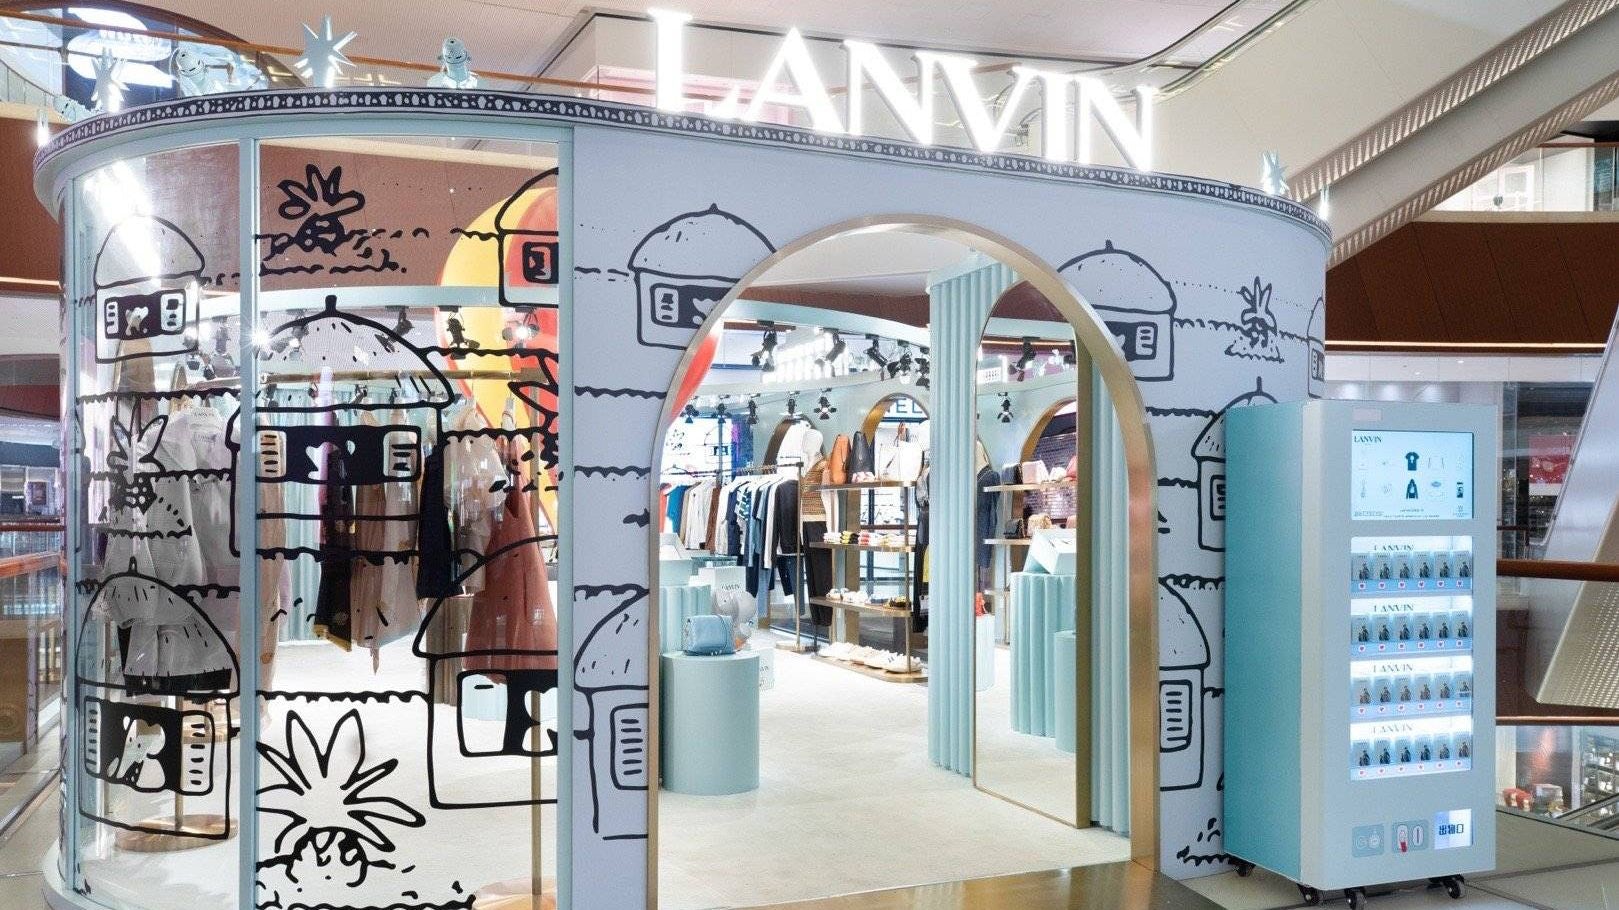 Lanvin Scores Again with Blind-Box Marketing